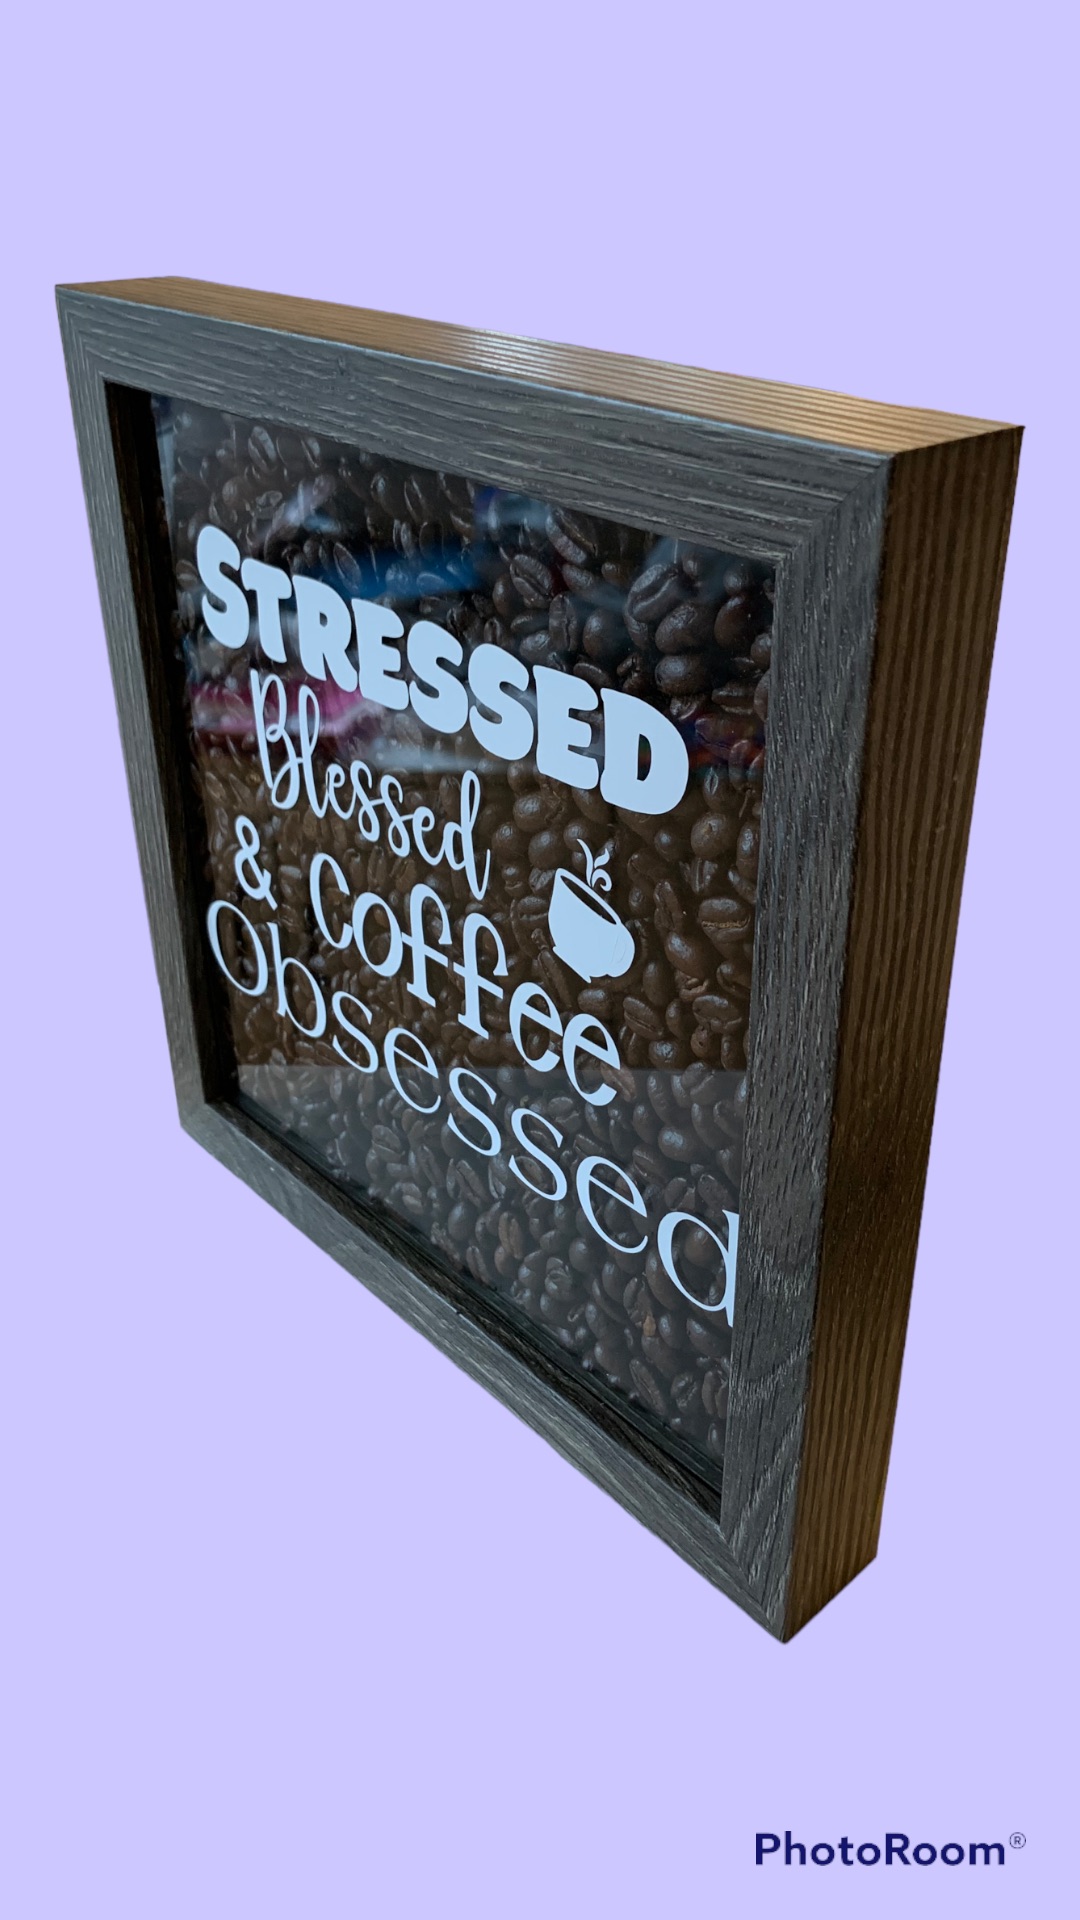 This Stressed, Blessed, & Coffee Obsessed is made with love by Duo Deesigns! Shop more unique gift ideas today with Spots Initiatives, the best way to support creators.